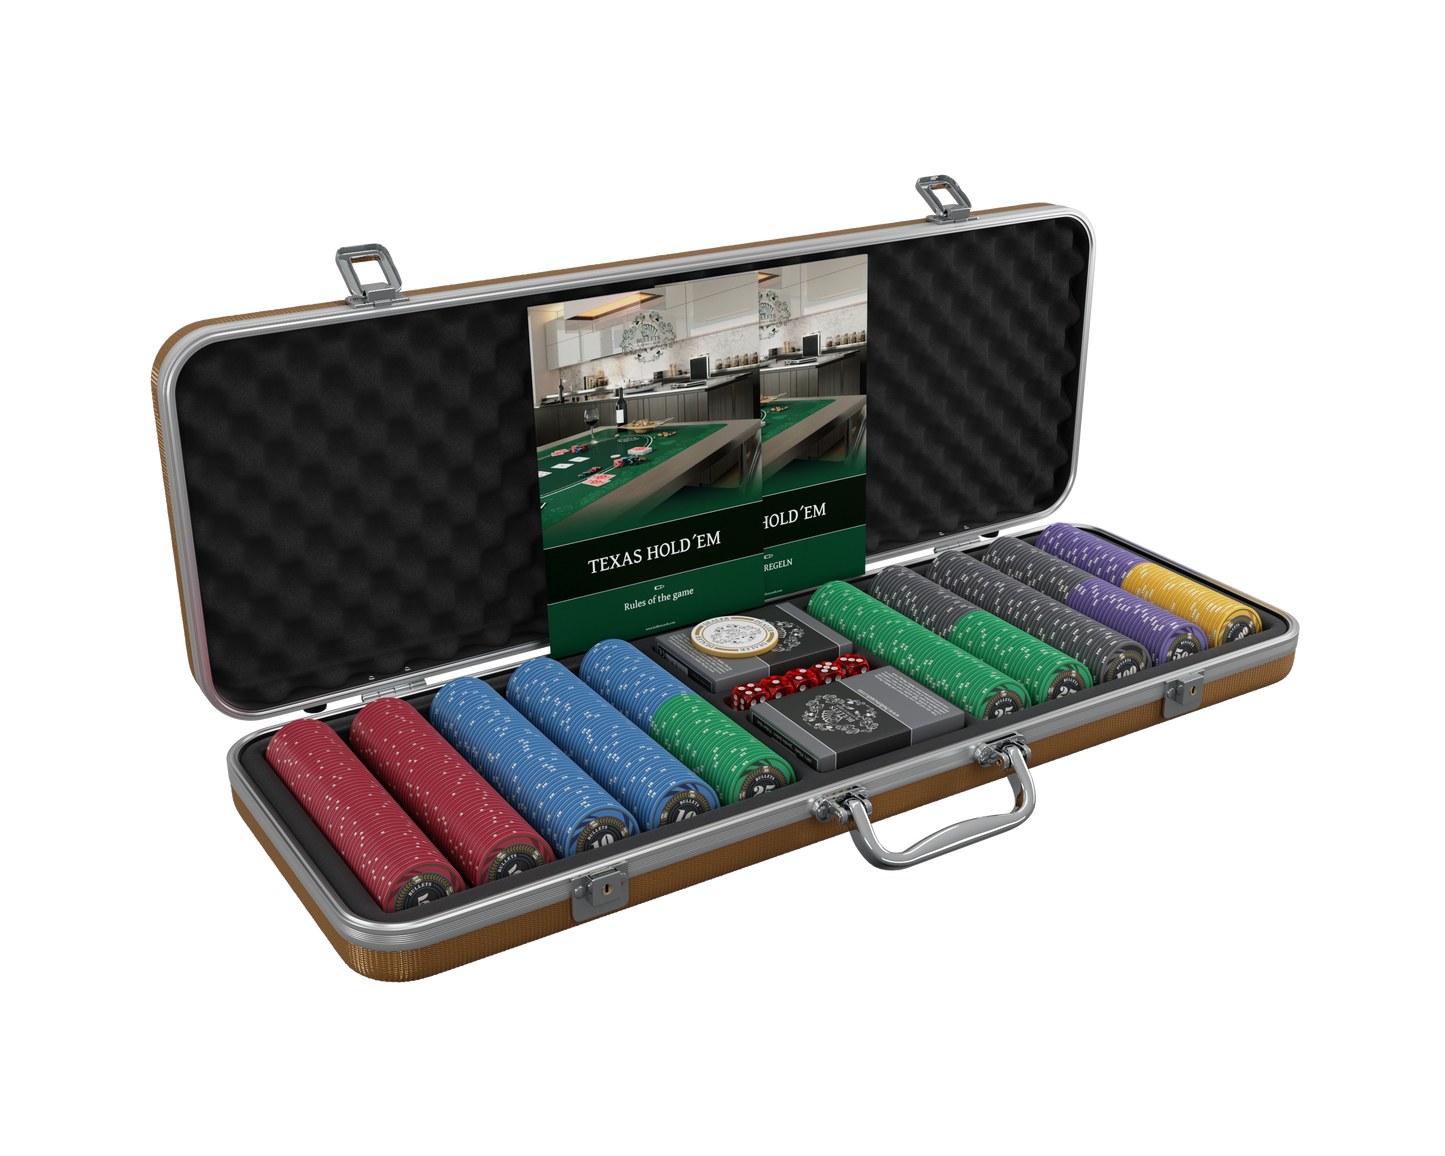 Poker case with 500 ceramic poker chips "Silvio" with values